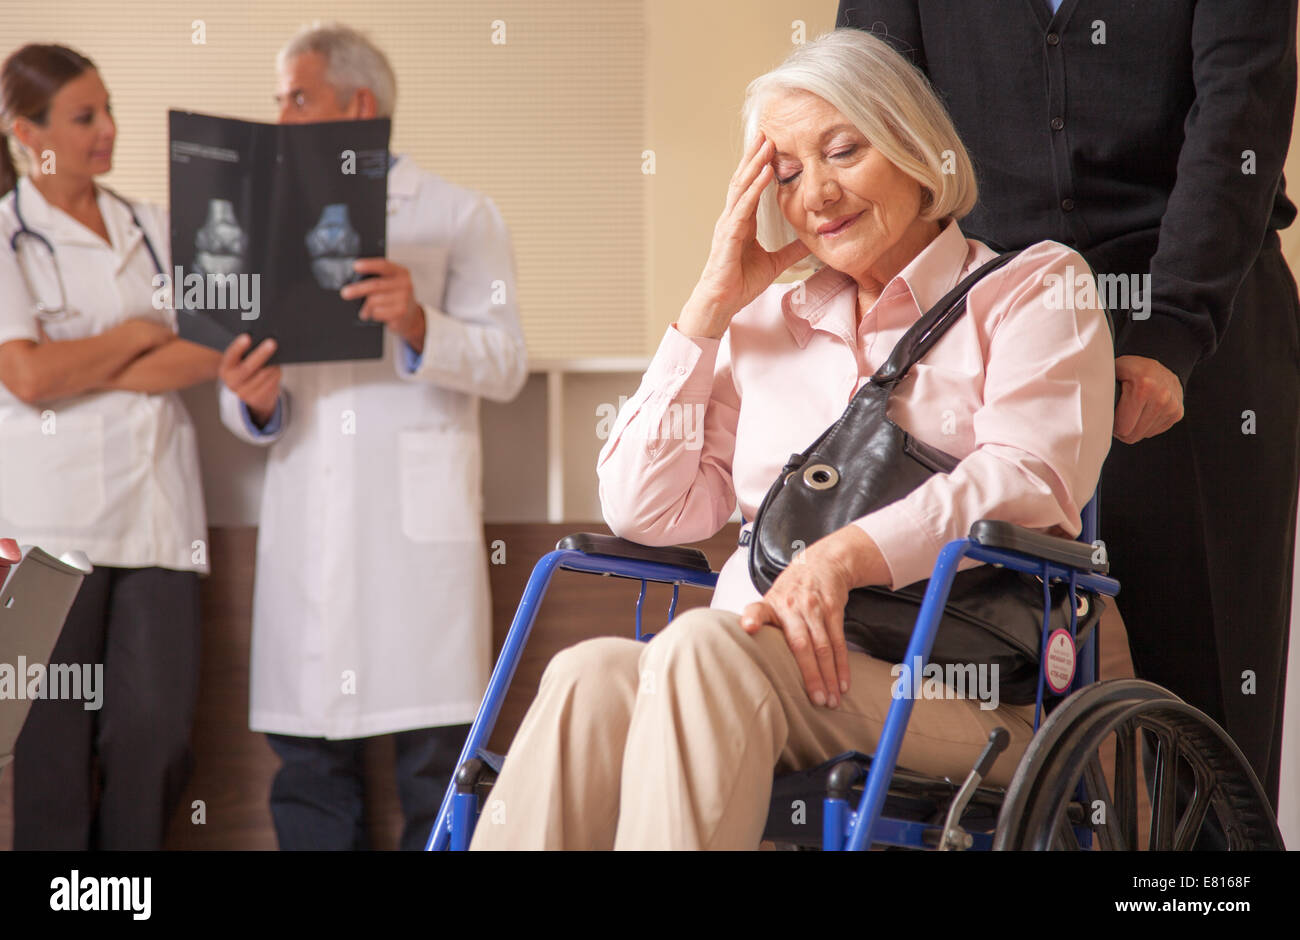 Mature woman on the wheelchair in hospital worried with her husband. Doctors analyzing scan in background. Stock Photo